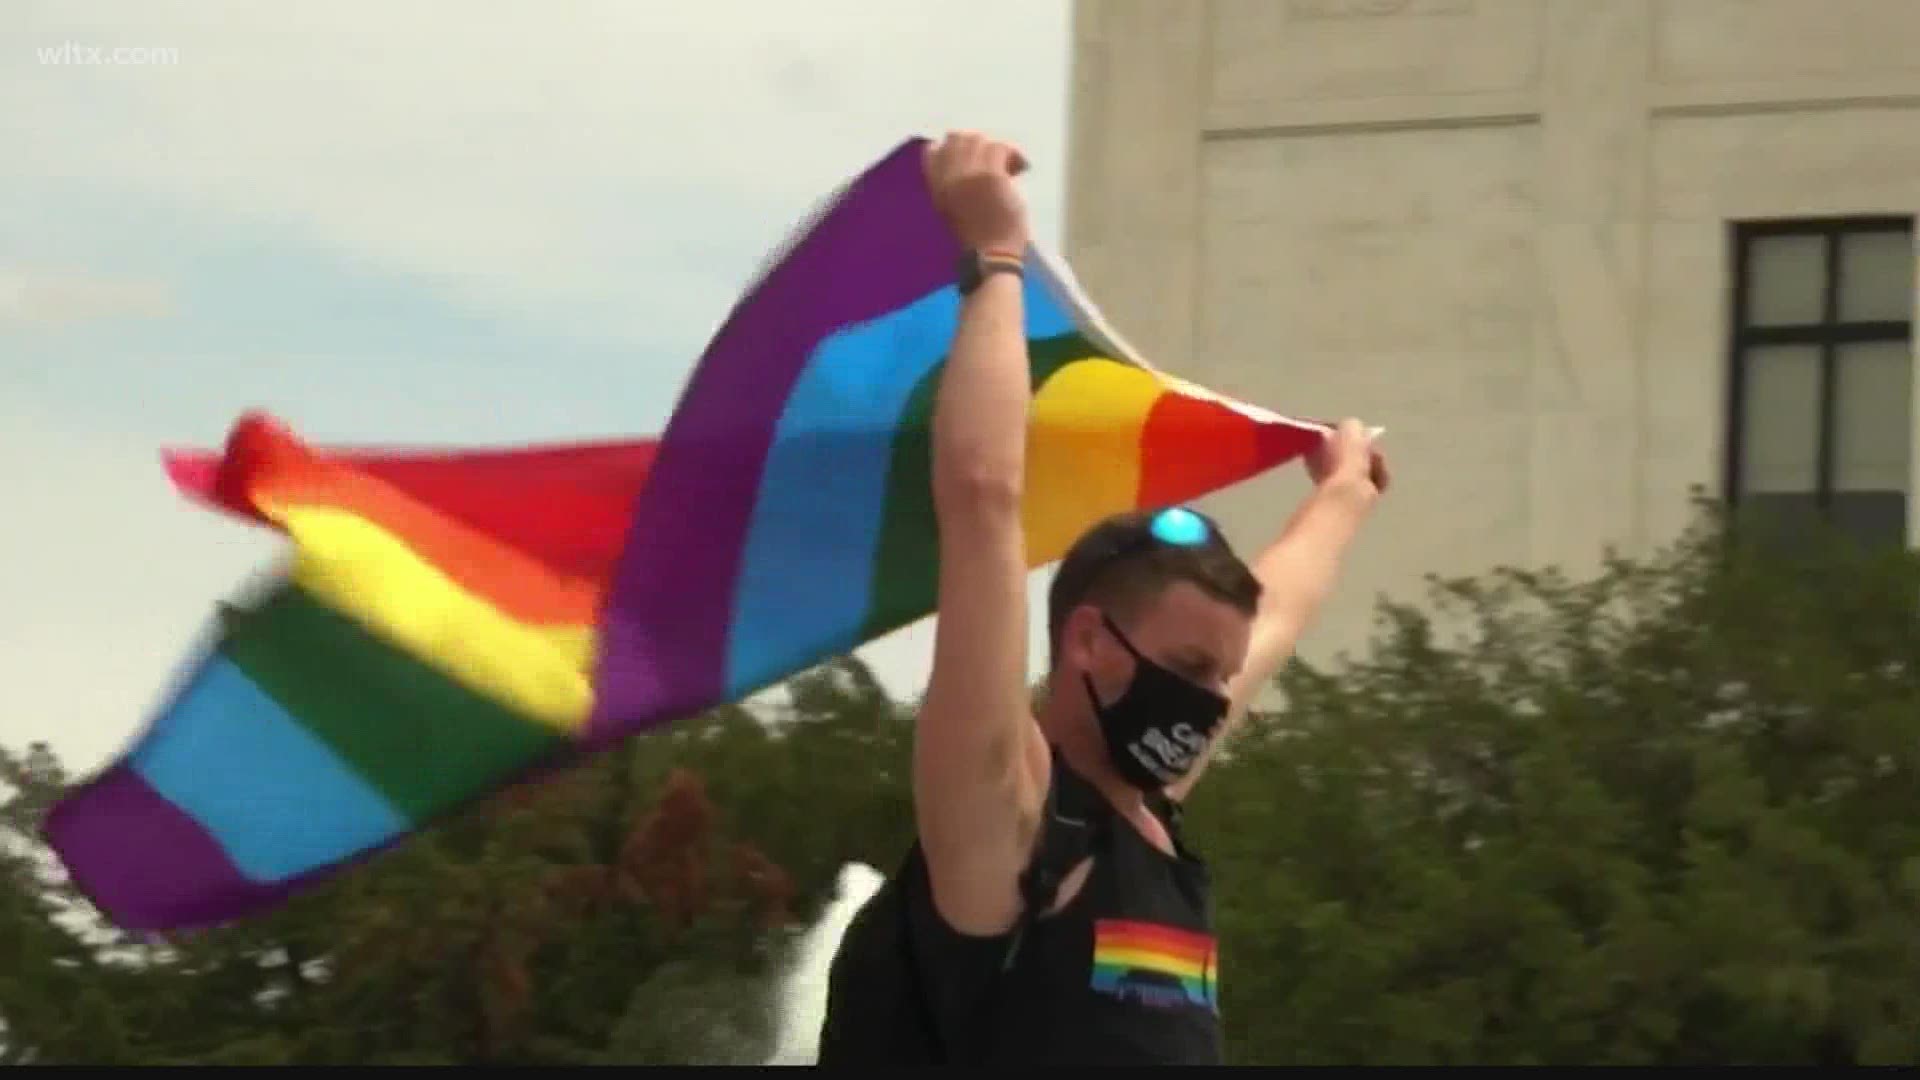 South Carolina’s hate crime bill got its first round of approval Thursday, but with an amendment that may exclude the LGBTQ community.